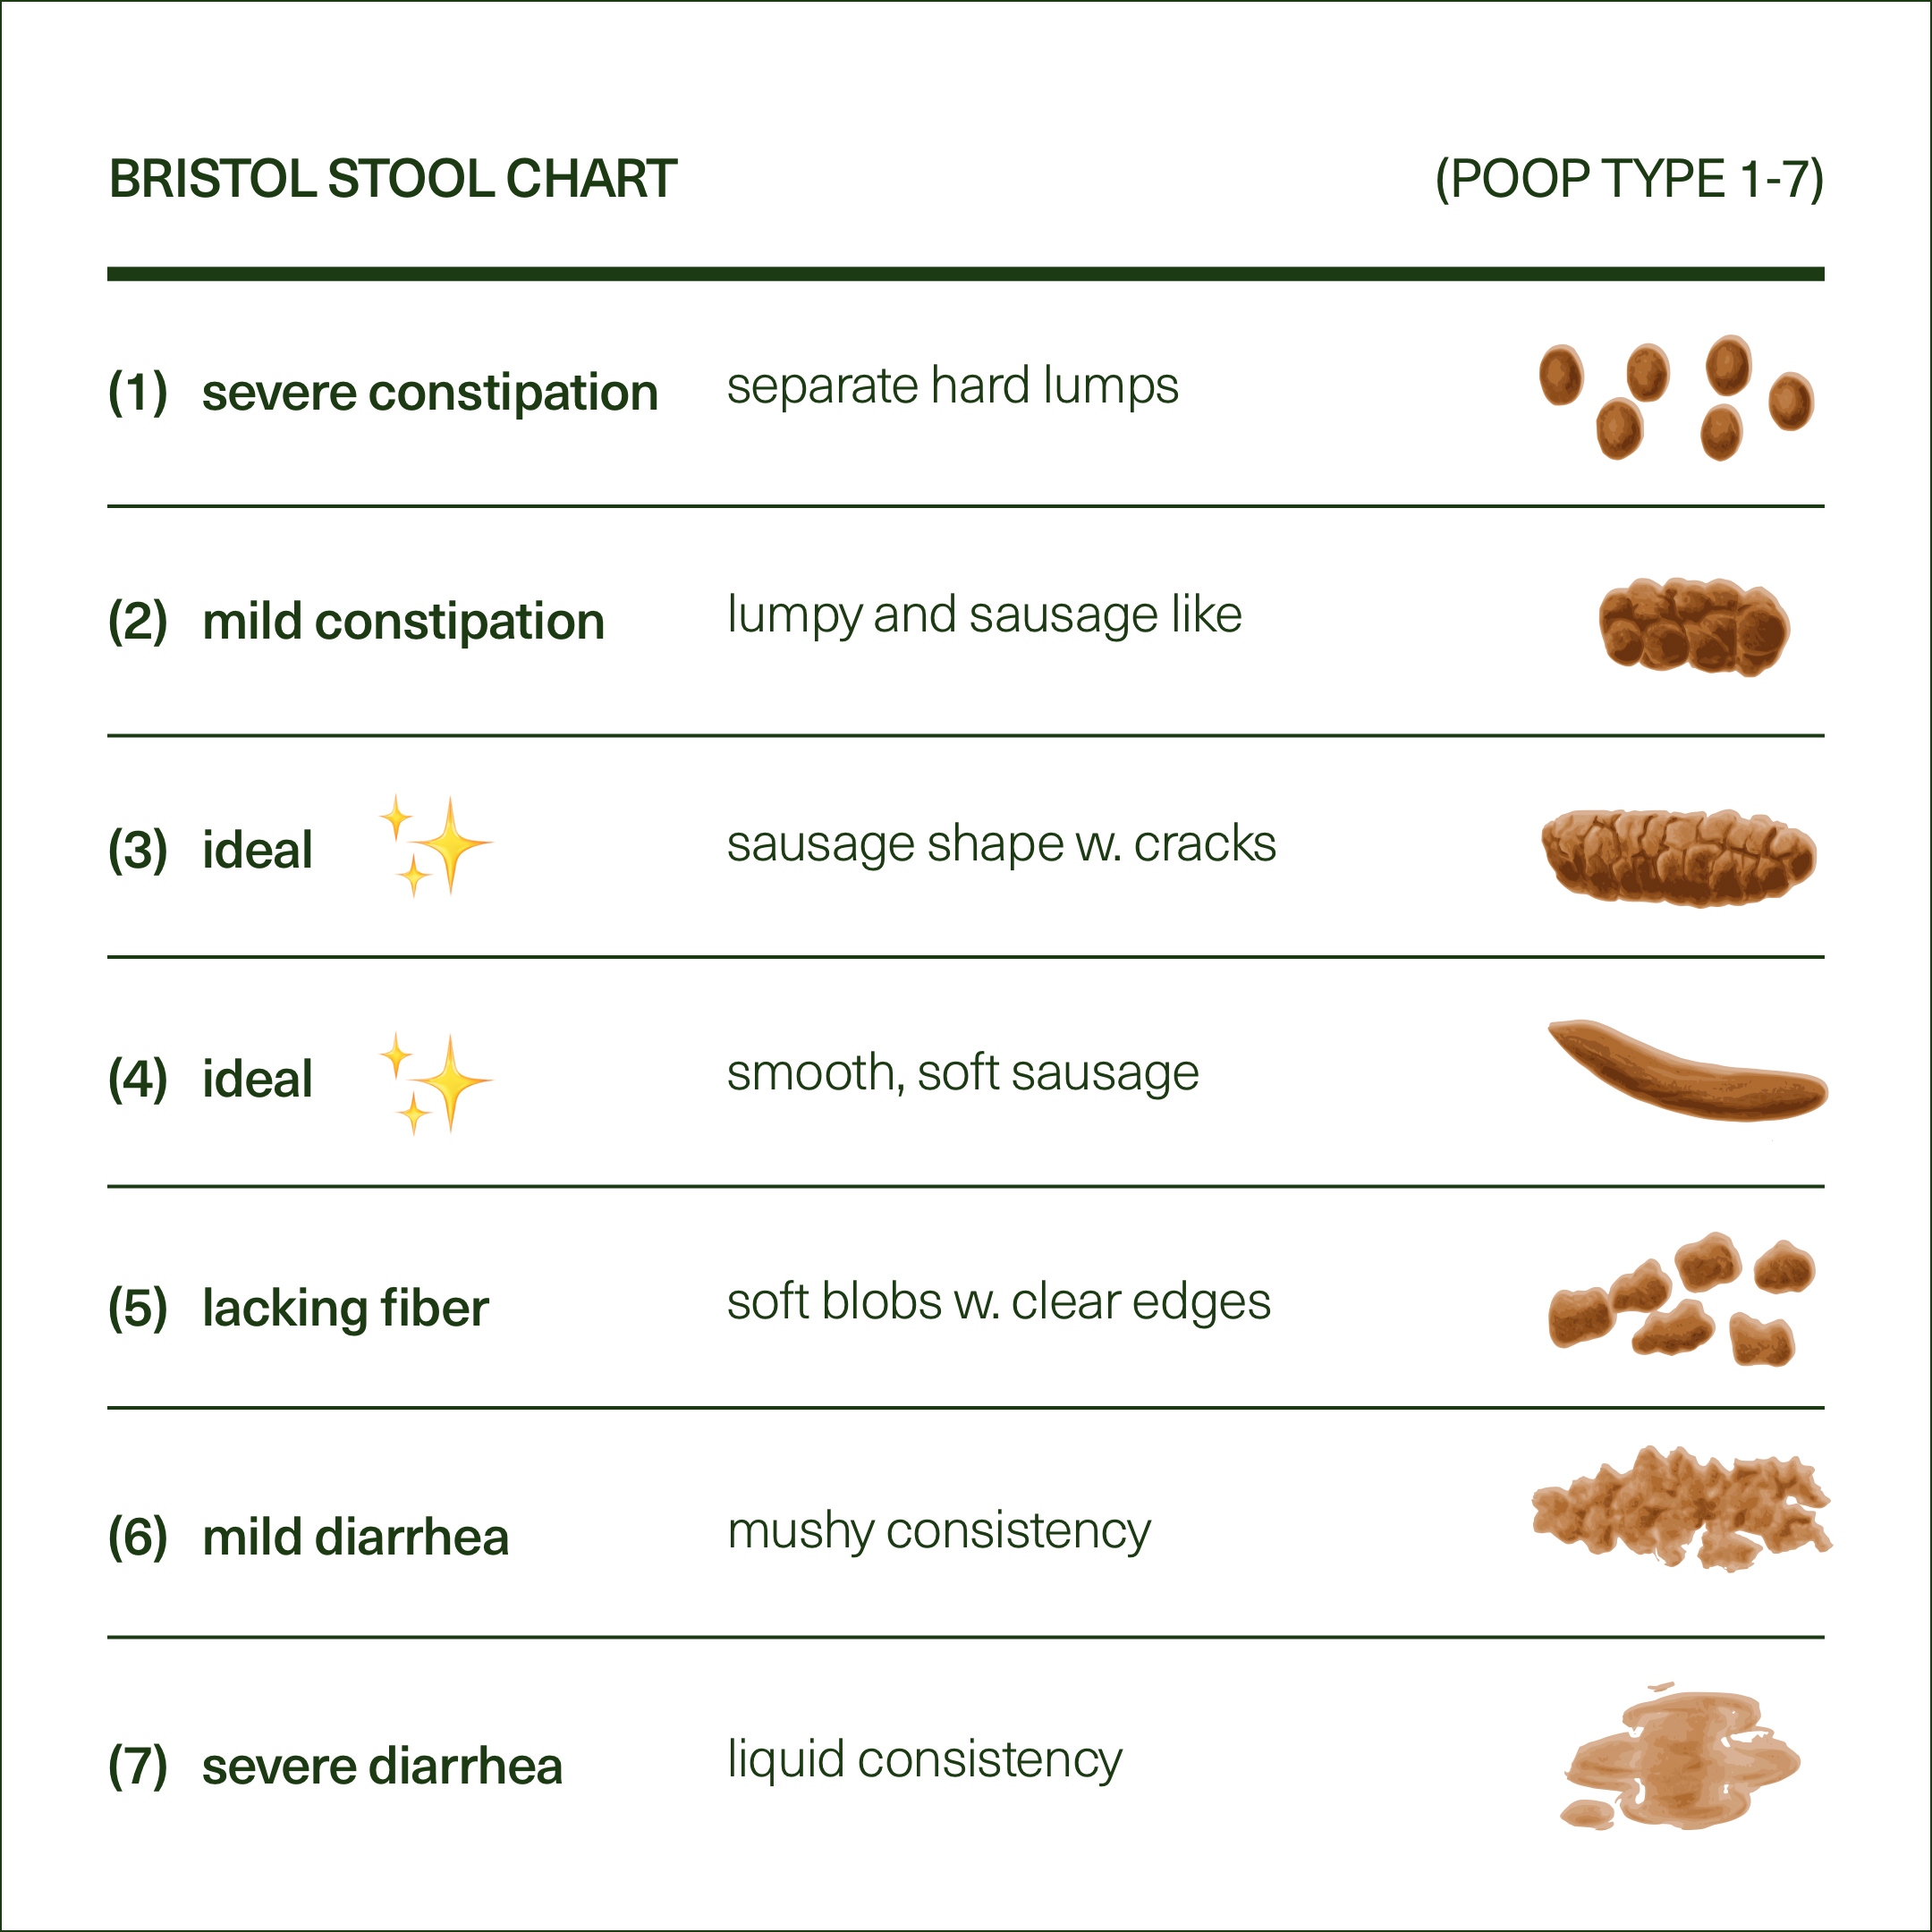 How to Read the Bristol Stool Chart - Poop Types 1-7 • Seed